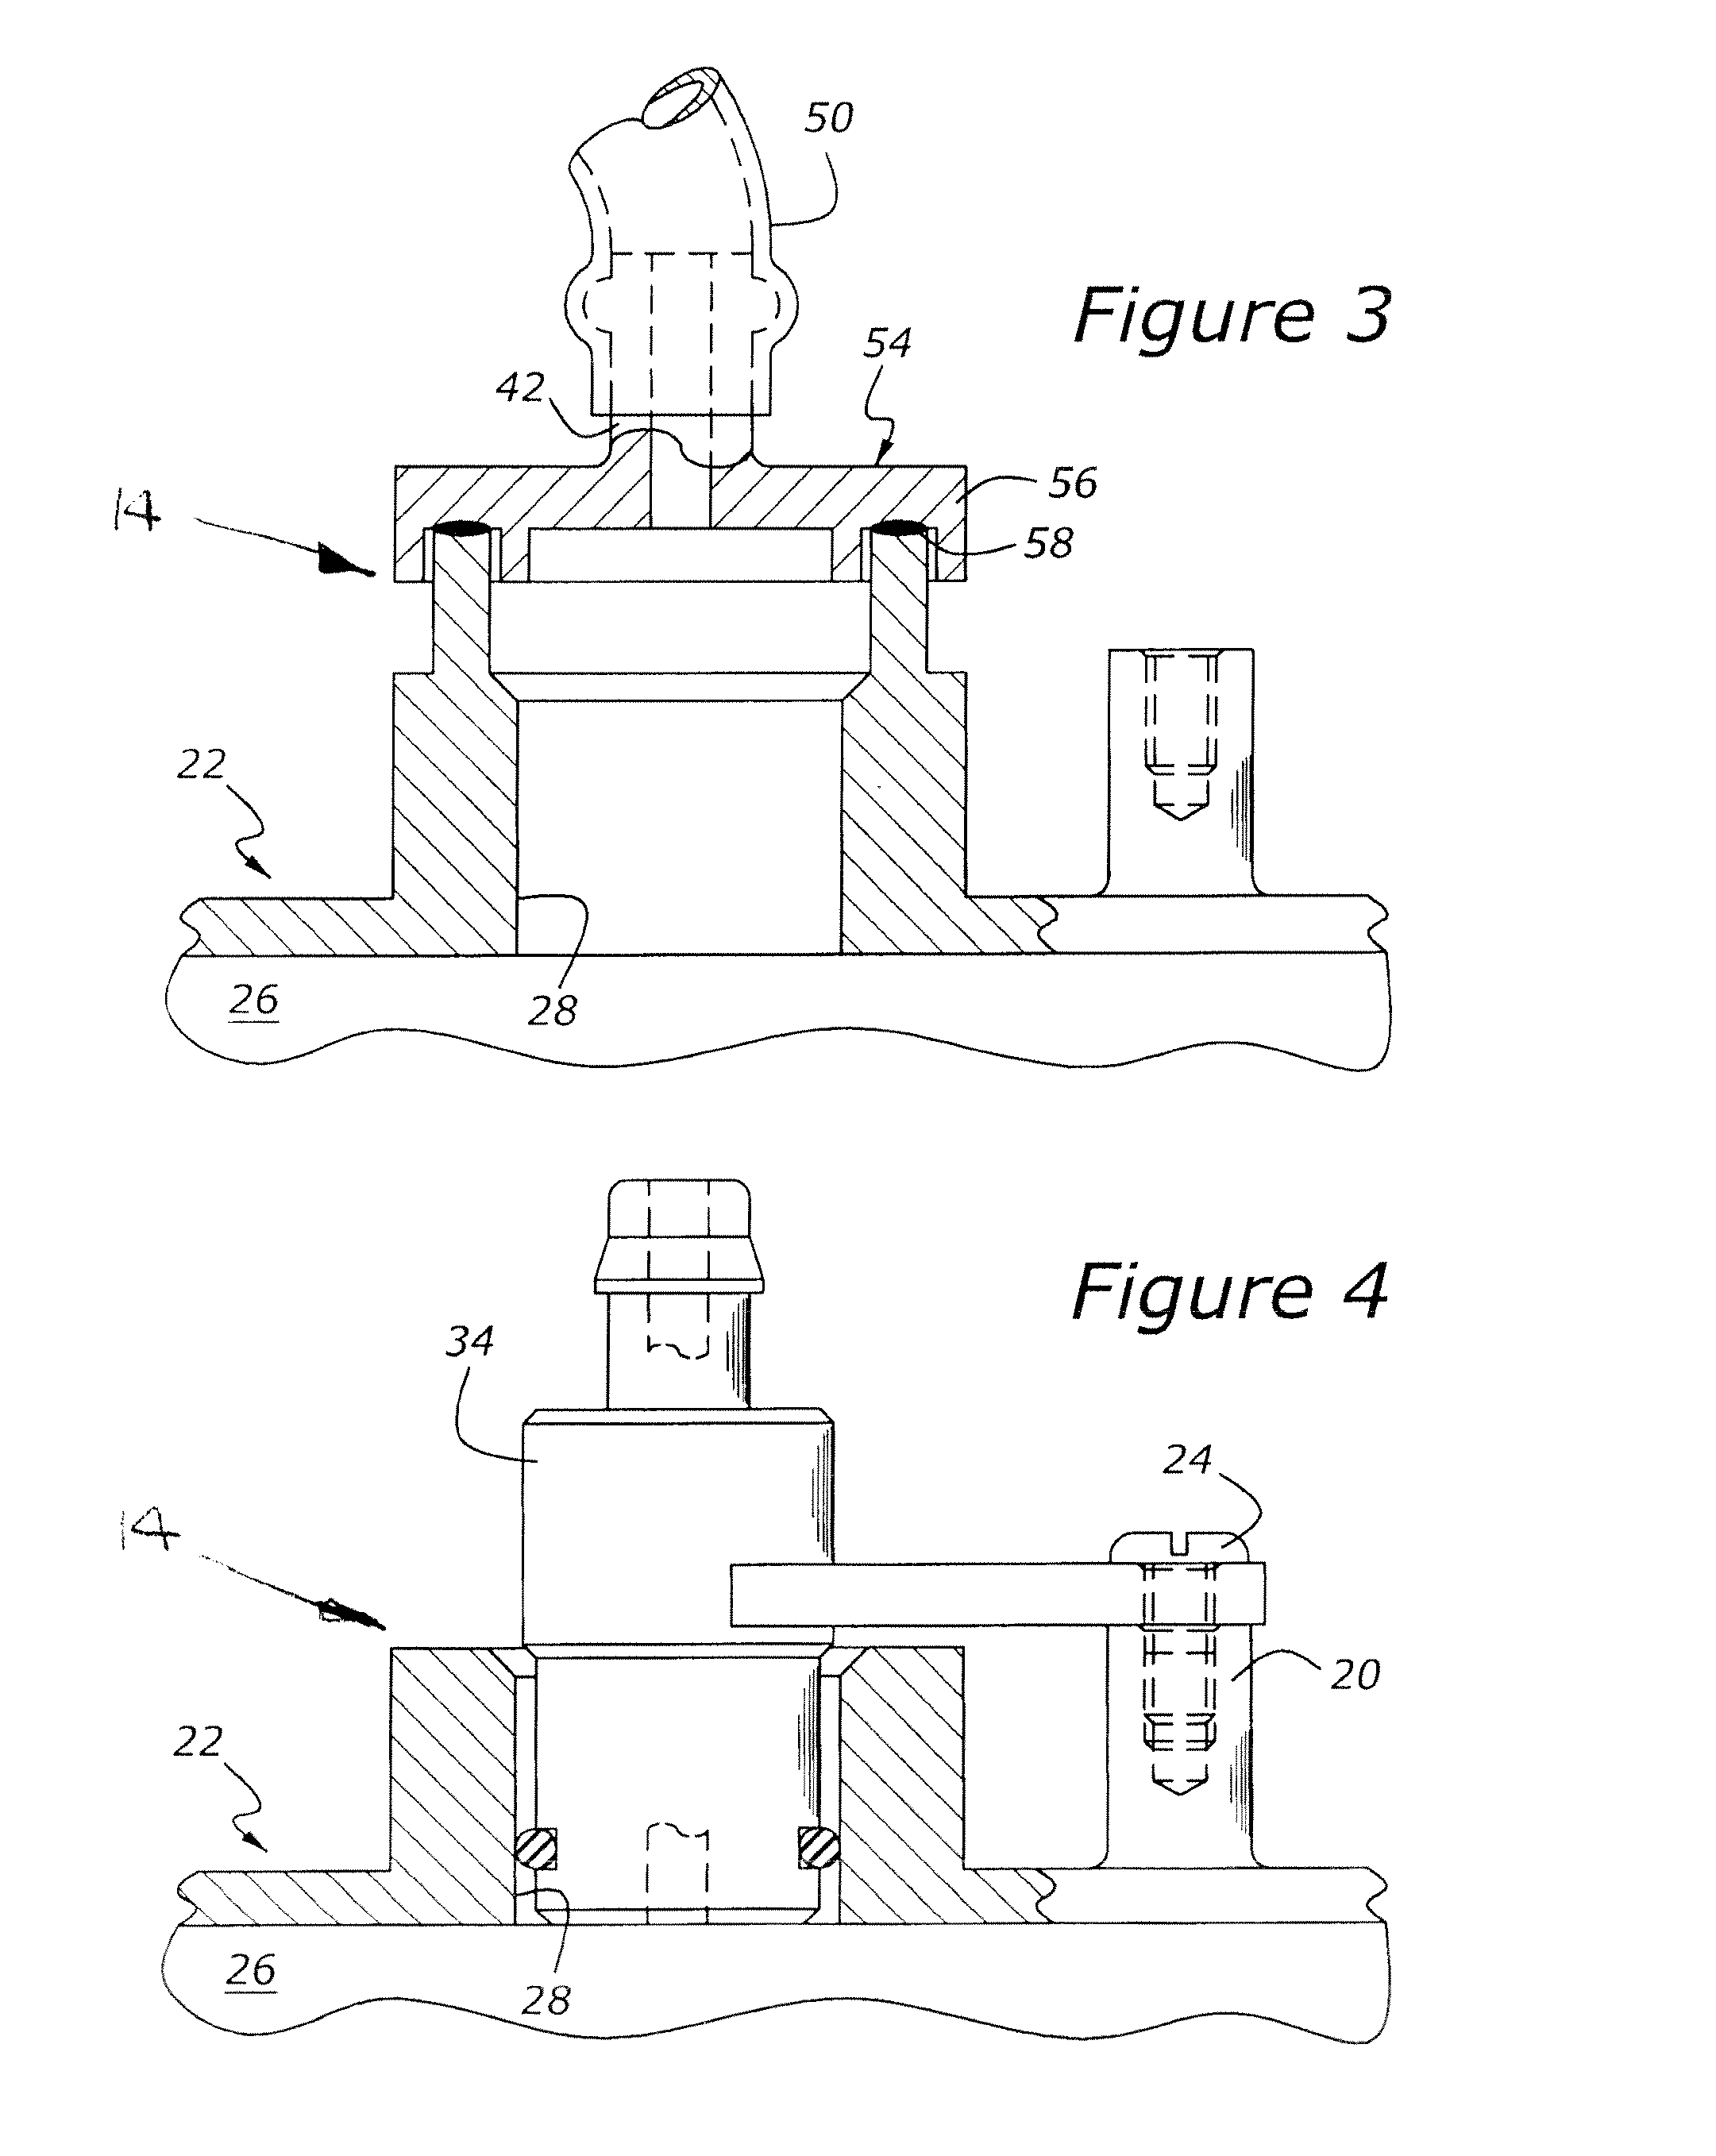 Multifunction fluid connector for automotive vehicle power system